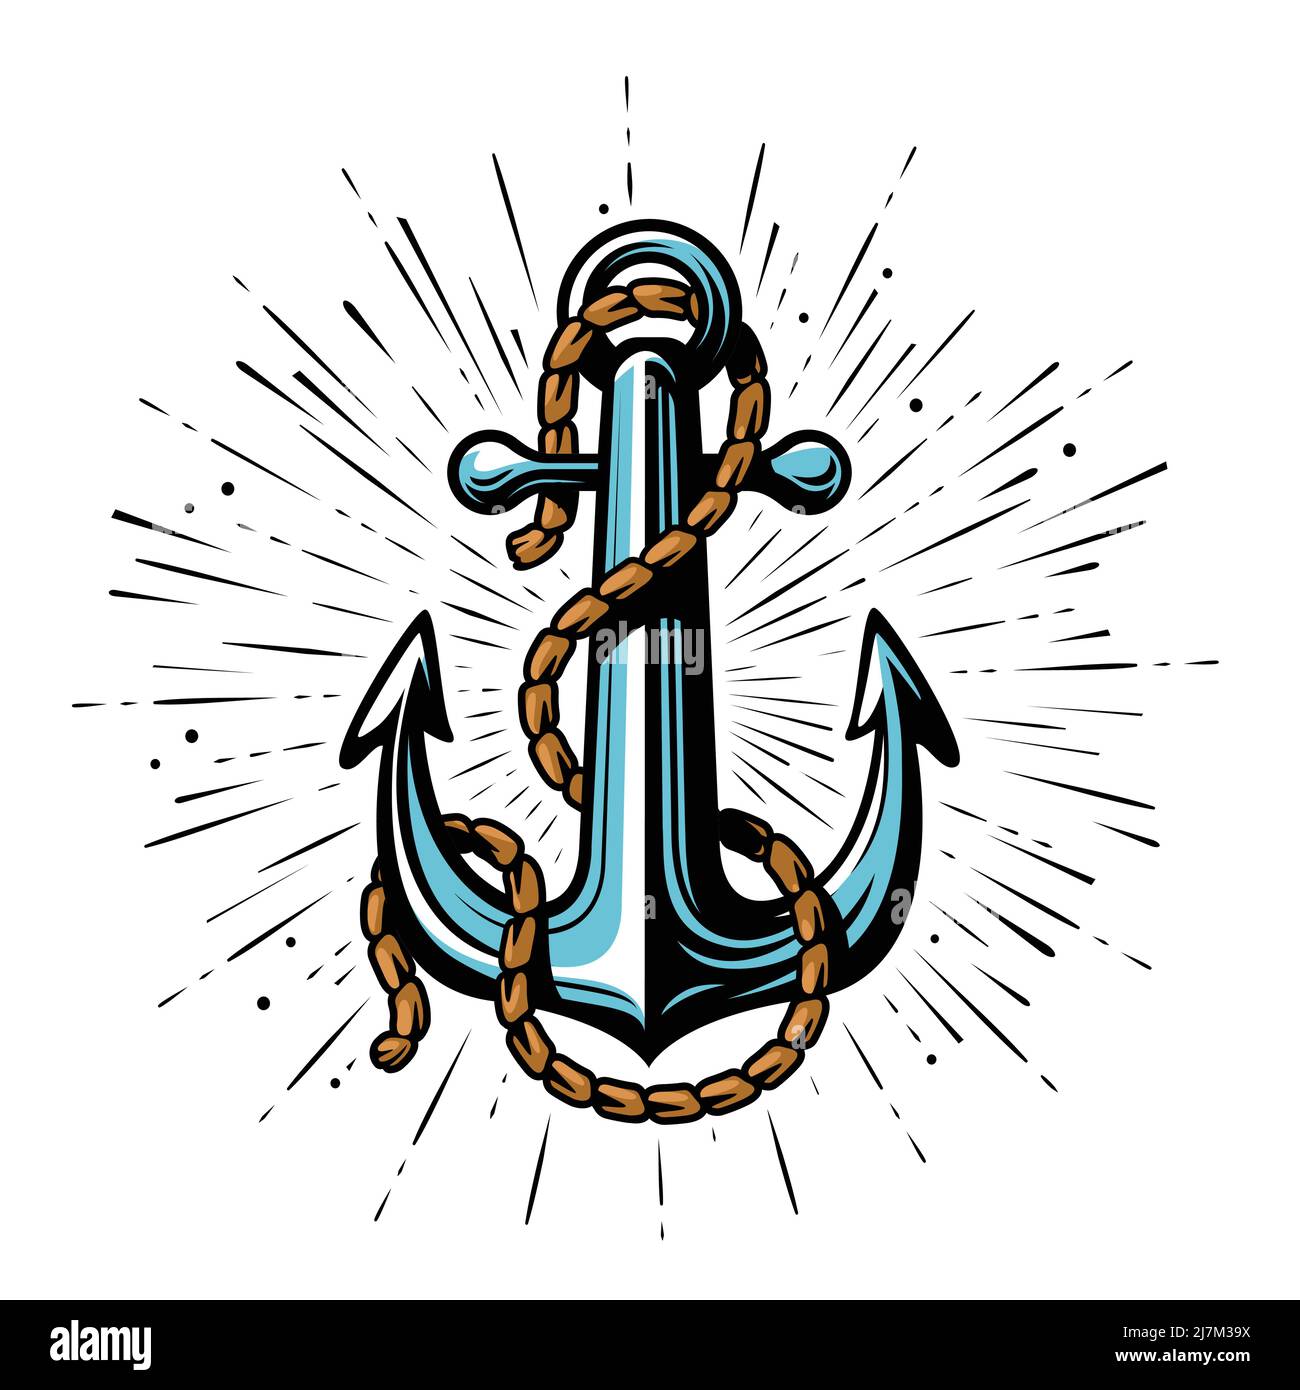 Nautical anchor with rope. Marine theme, seafaring symbol. Vector